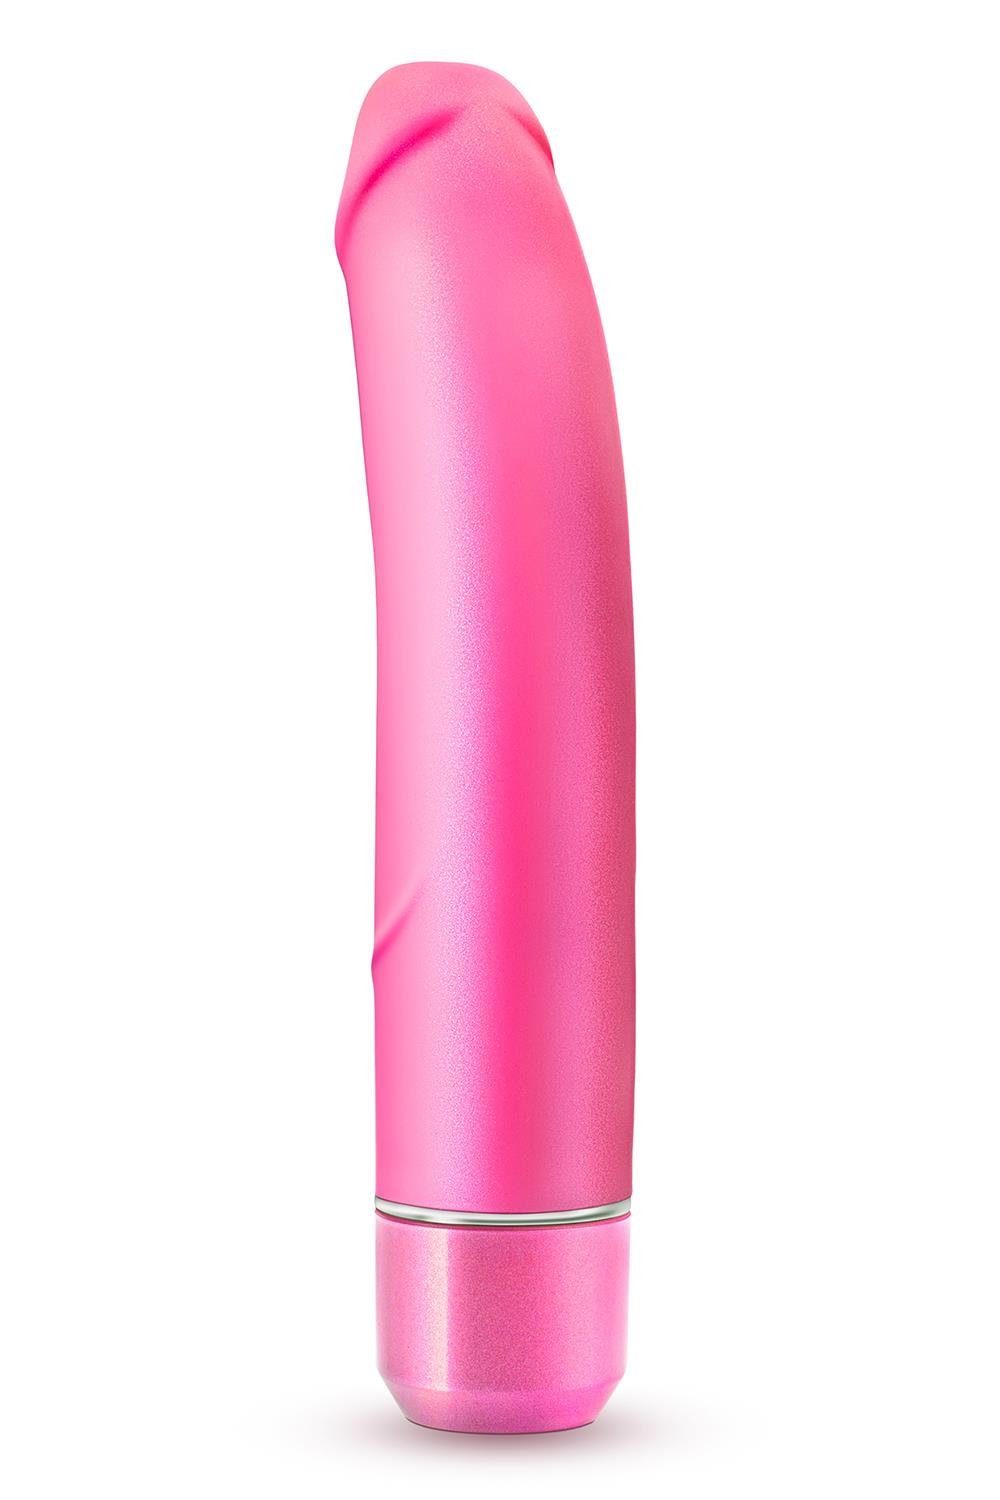 Luxe Plud Pink G-Punkt-Vibrator Aspire Blush